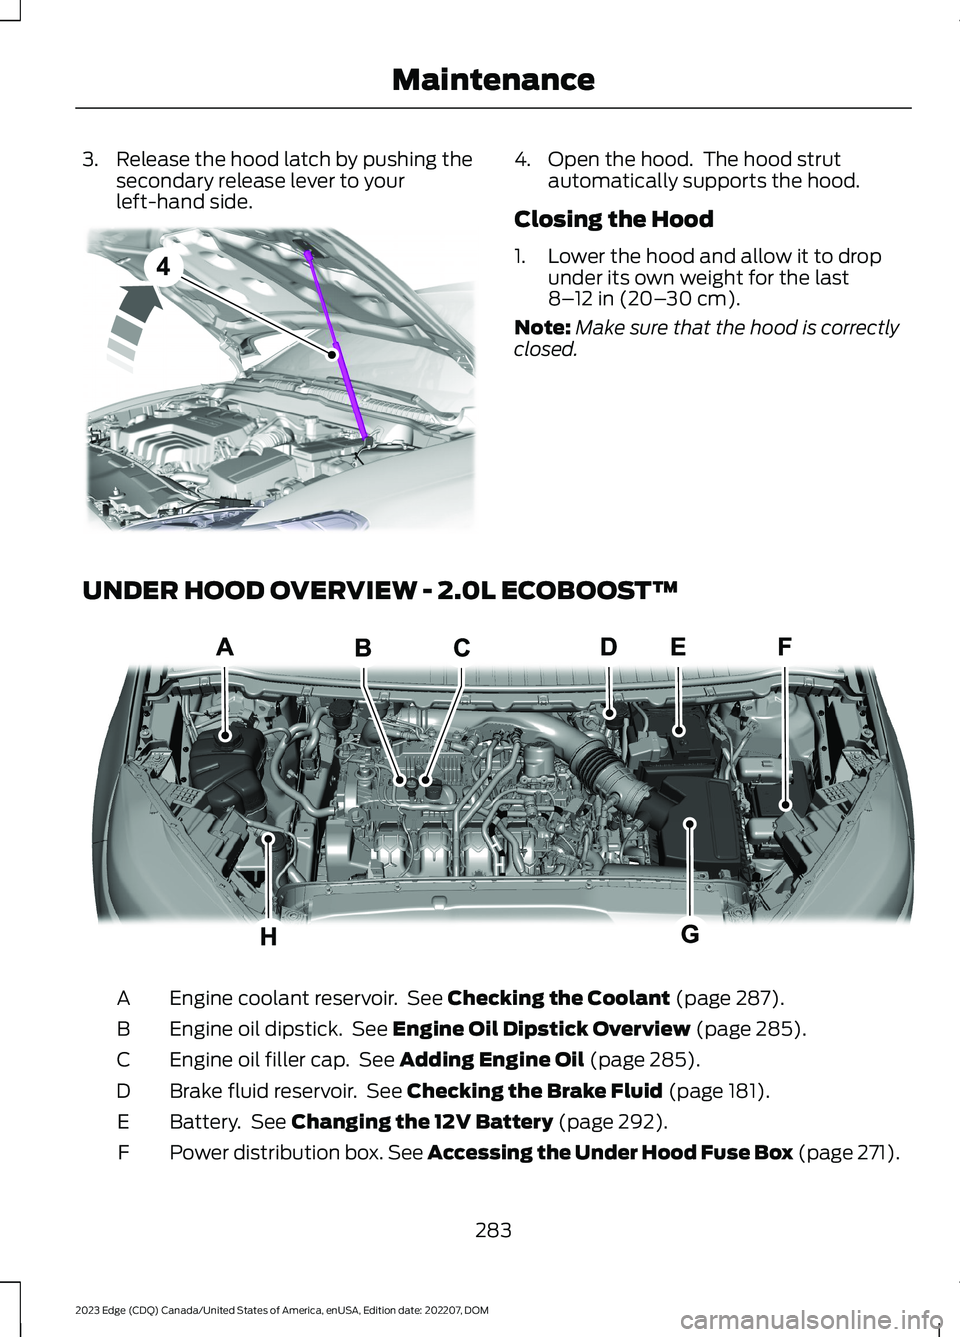 FORD EDGE 2023  Owners Manual 3.Release the hood latch by pushing thesecondary release lever to yourleft-hand side.
4.Open the hood.  The hood strutautomatically supports the hood.
Closing the Hood
1.Lower the hood and allow it to